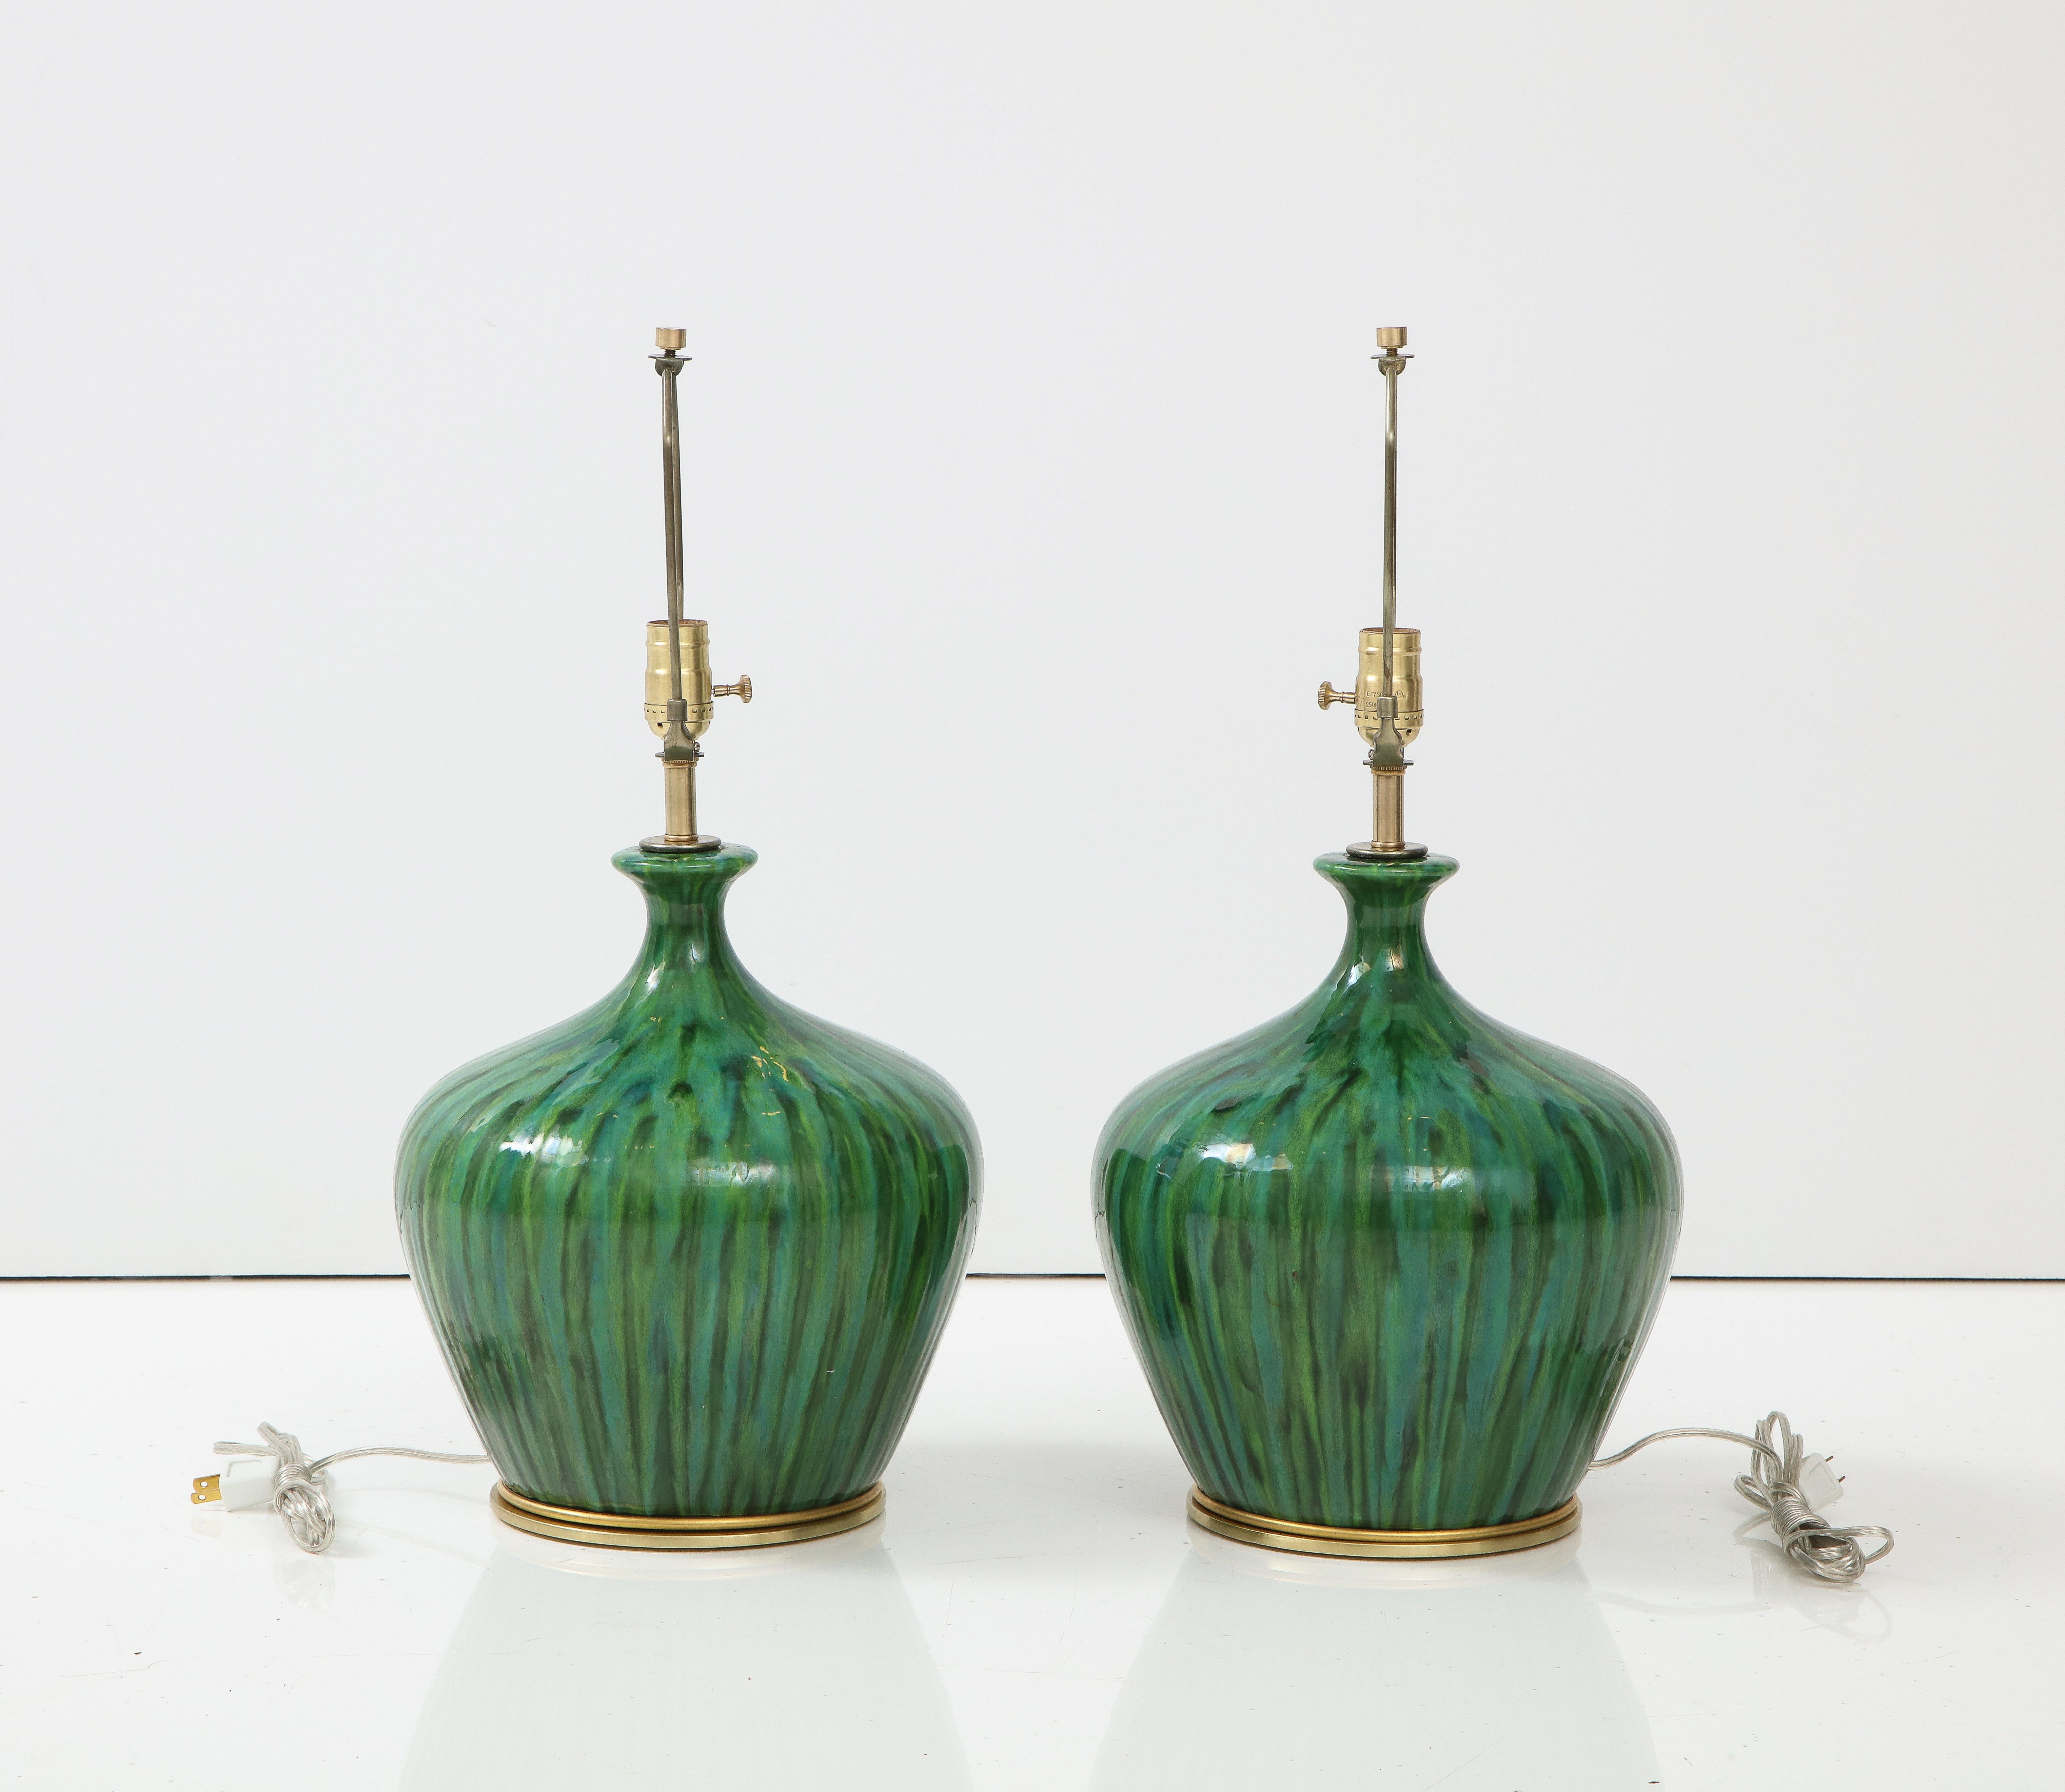 Modernist pair of mottled / striated emerald green glazed porcelain lamps sitting on custom aged brass disc bases. Rewired for use in the USA, 100W max.